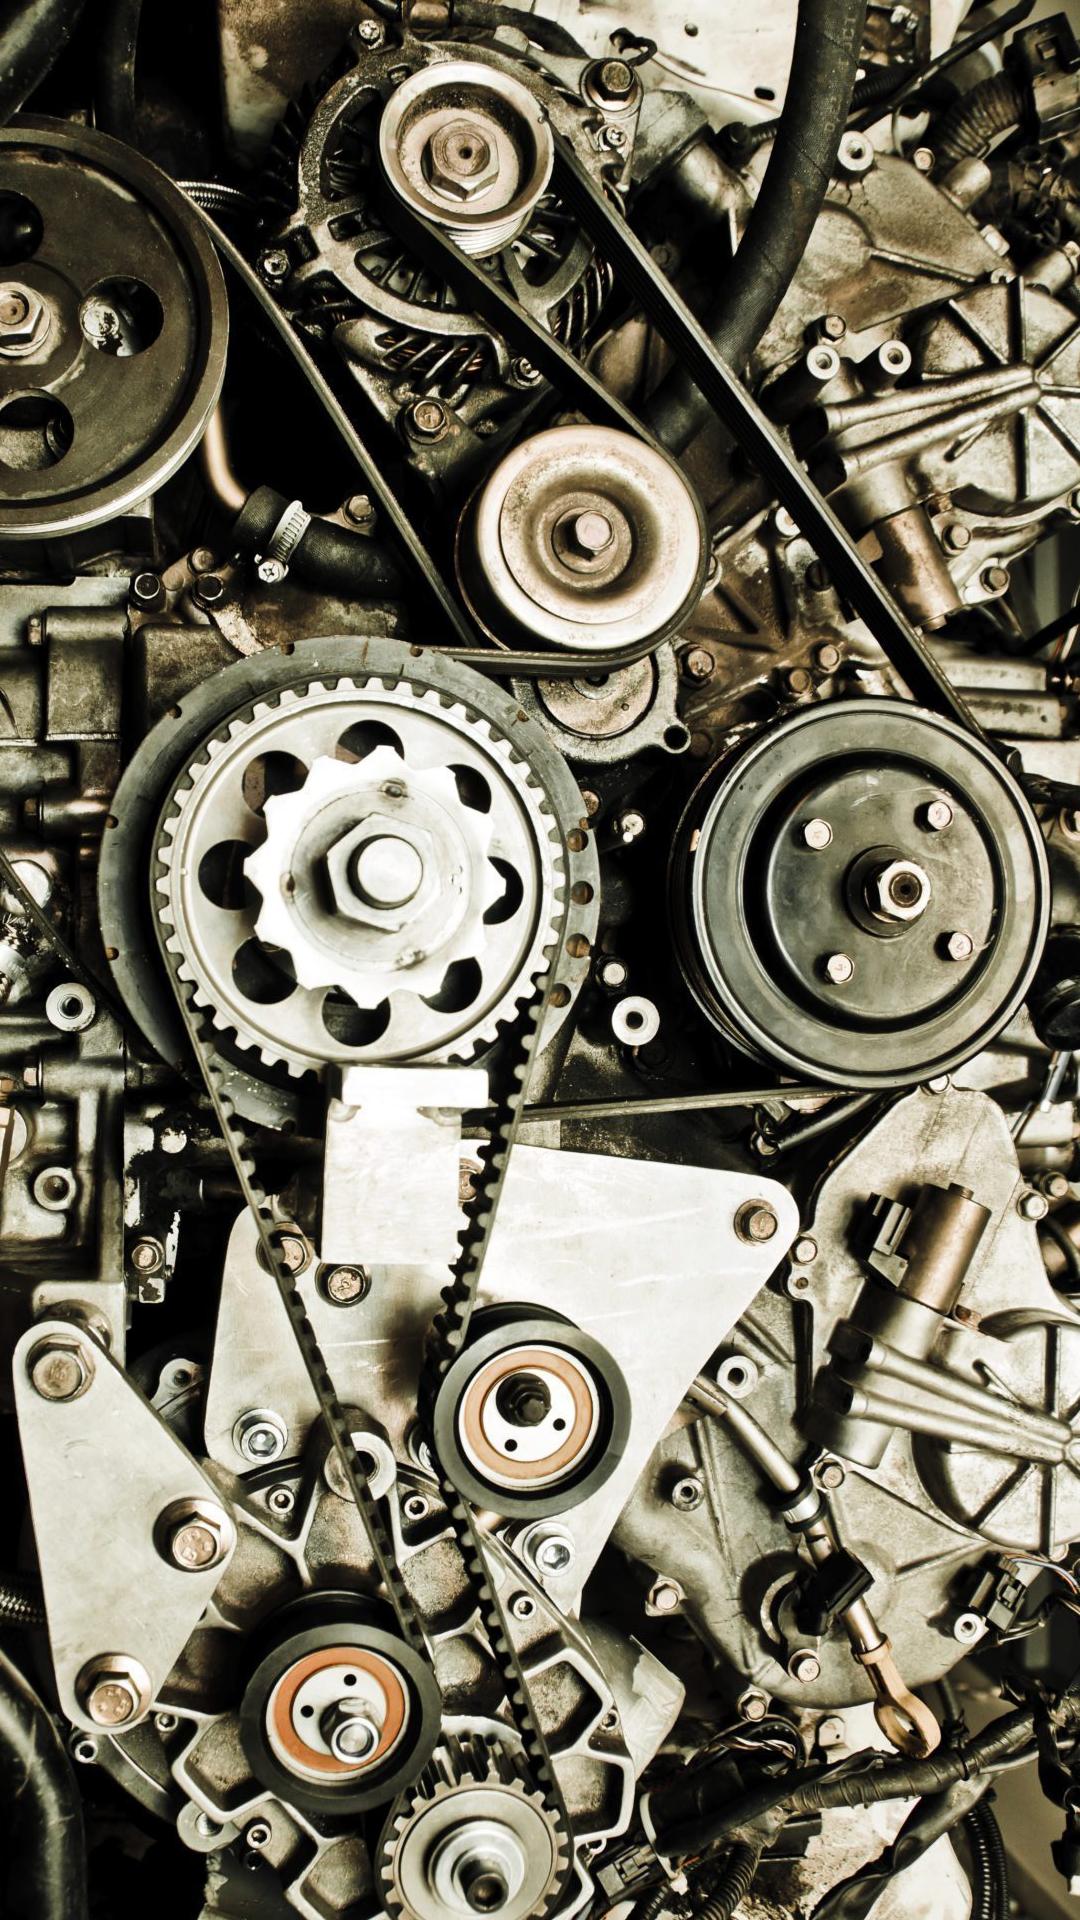 Free Download Mechanical Gear Apus Live Wallpaper For Android Apk Download 1080x19 For Your Desktop Mobile Tablet Explore 19 Mechanical Wallpaper Mechanical Background Wallpaper Mechanical Desktop Wallpaper Mechanical Wallpaper Hd